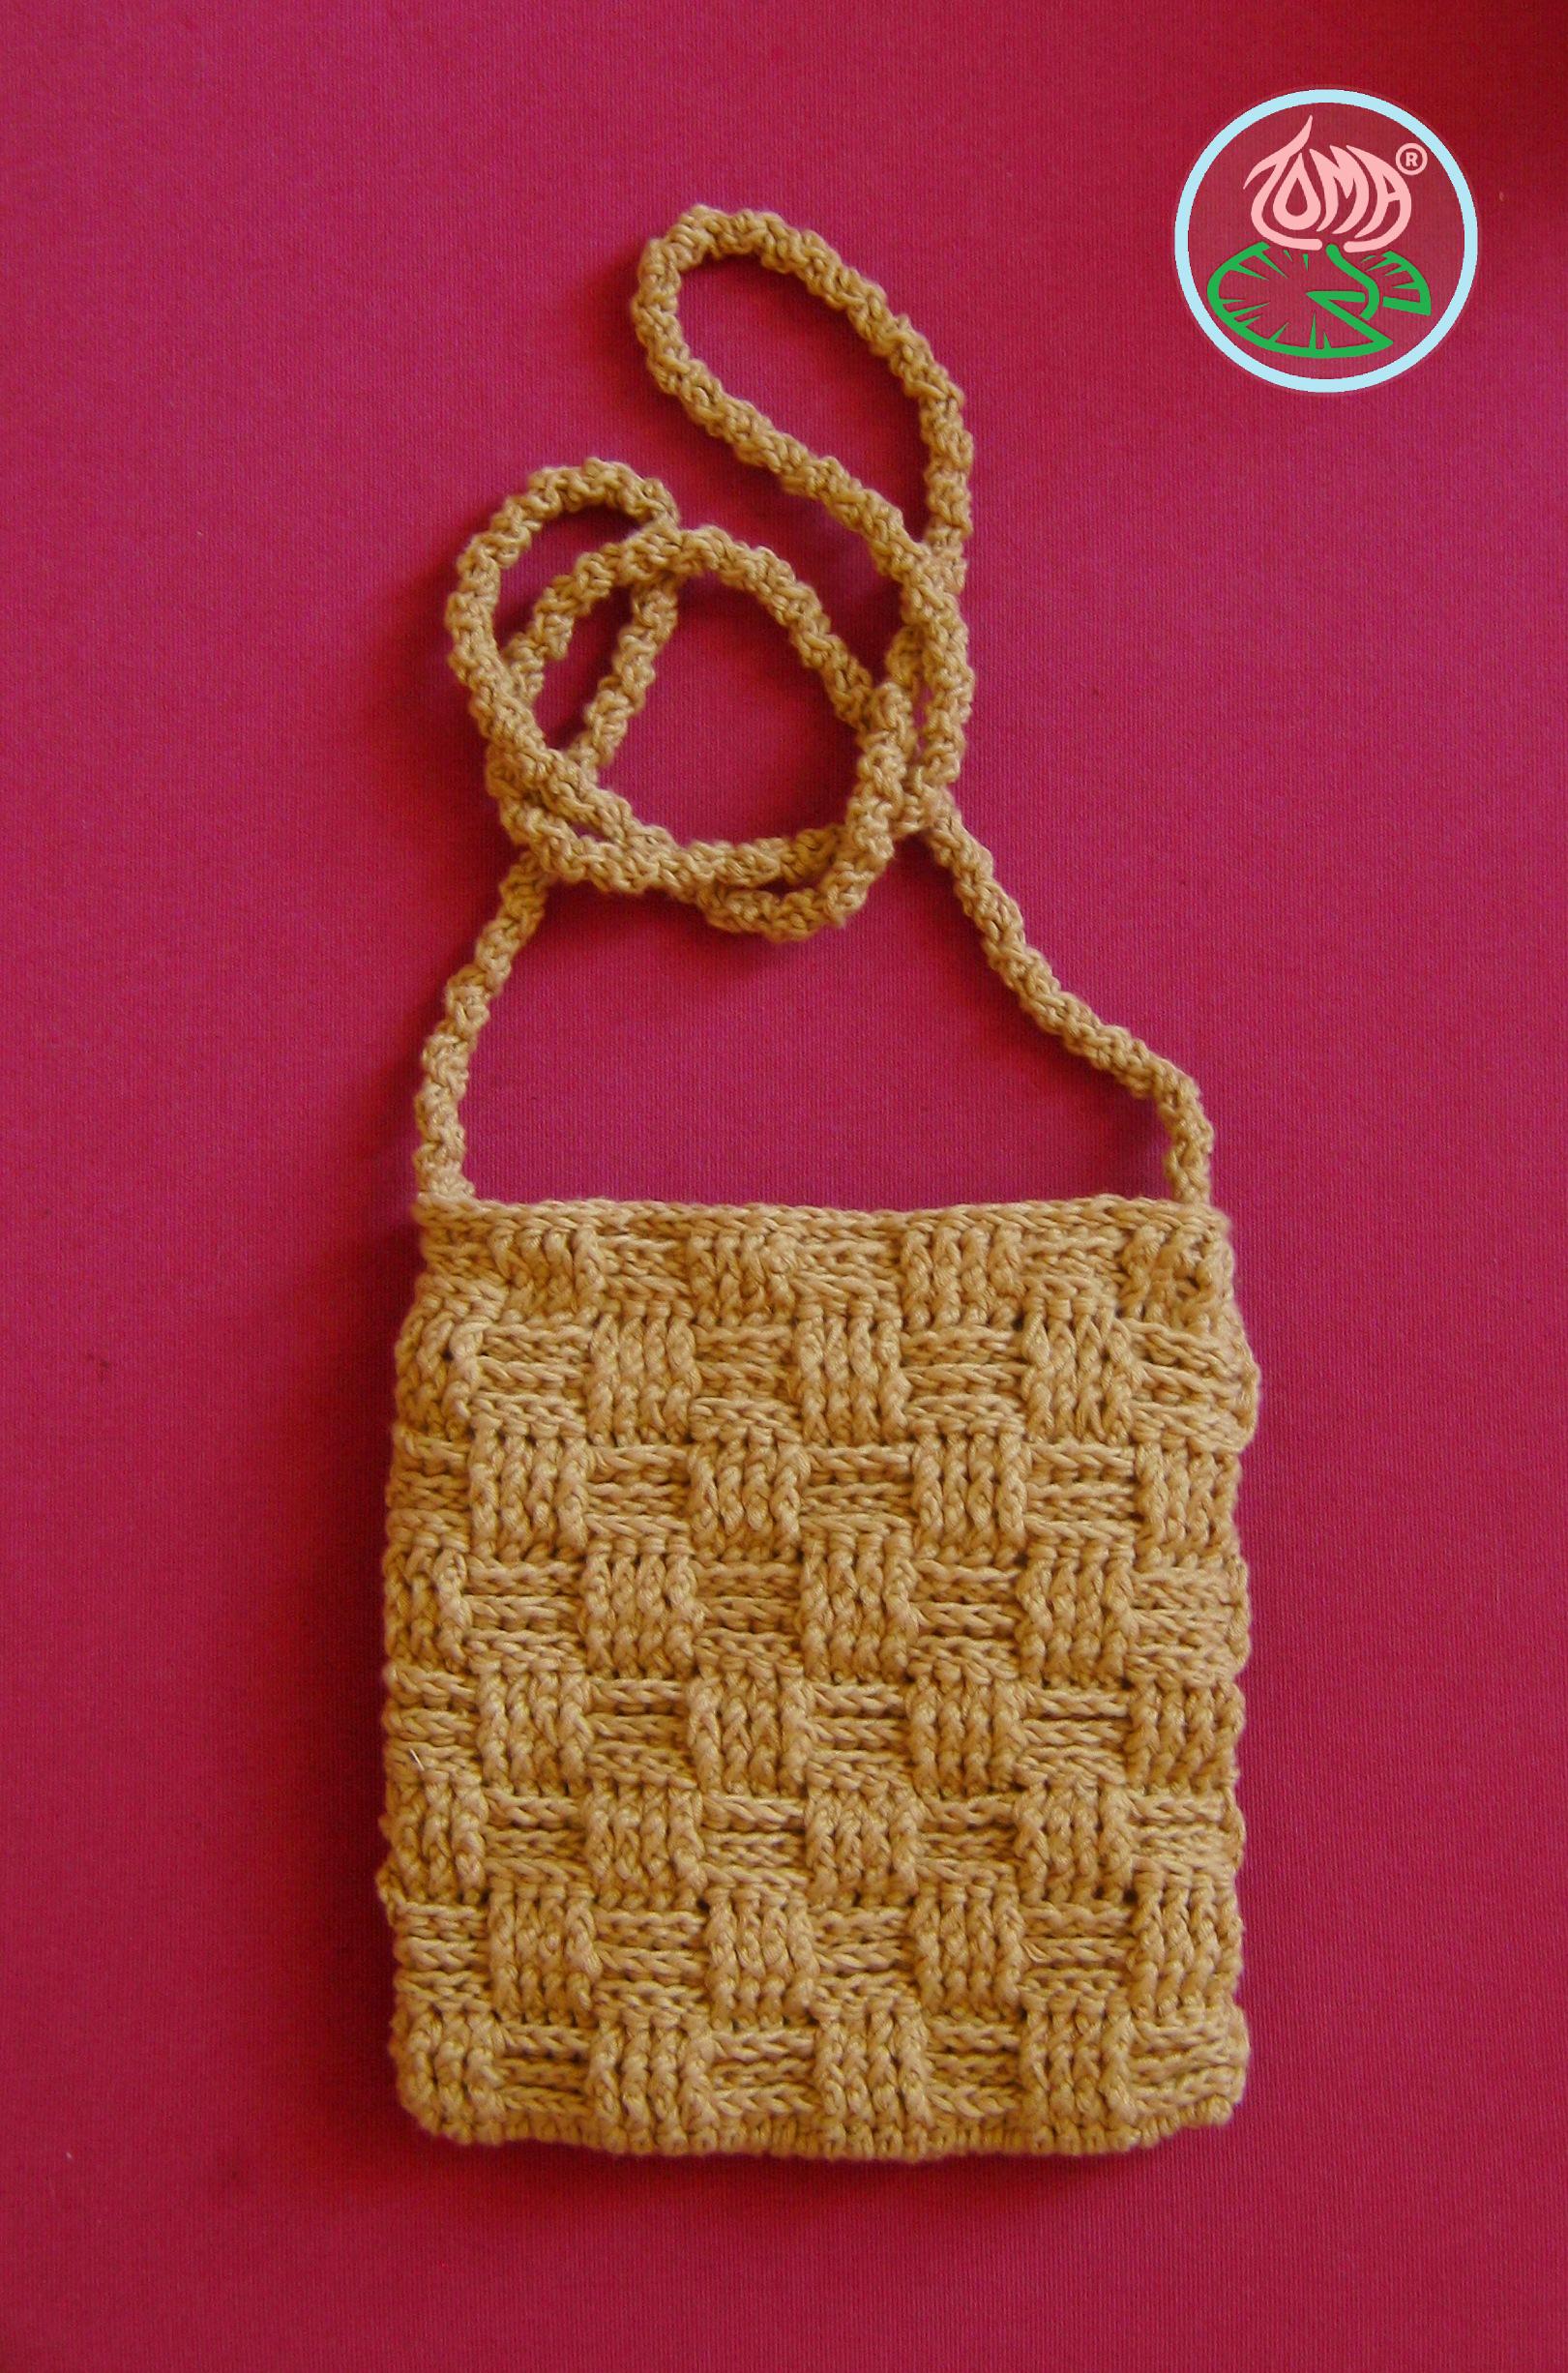 Free Pattern: Crocheted Over the Shoulder Mini Purse – Basketwave crochet | Toma Creations